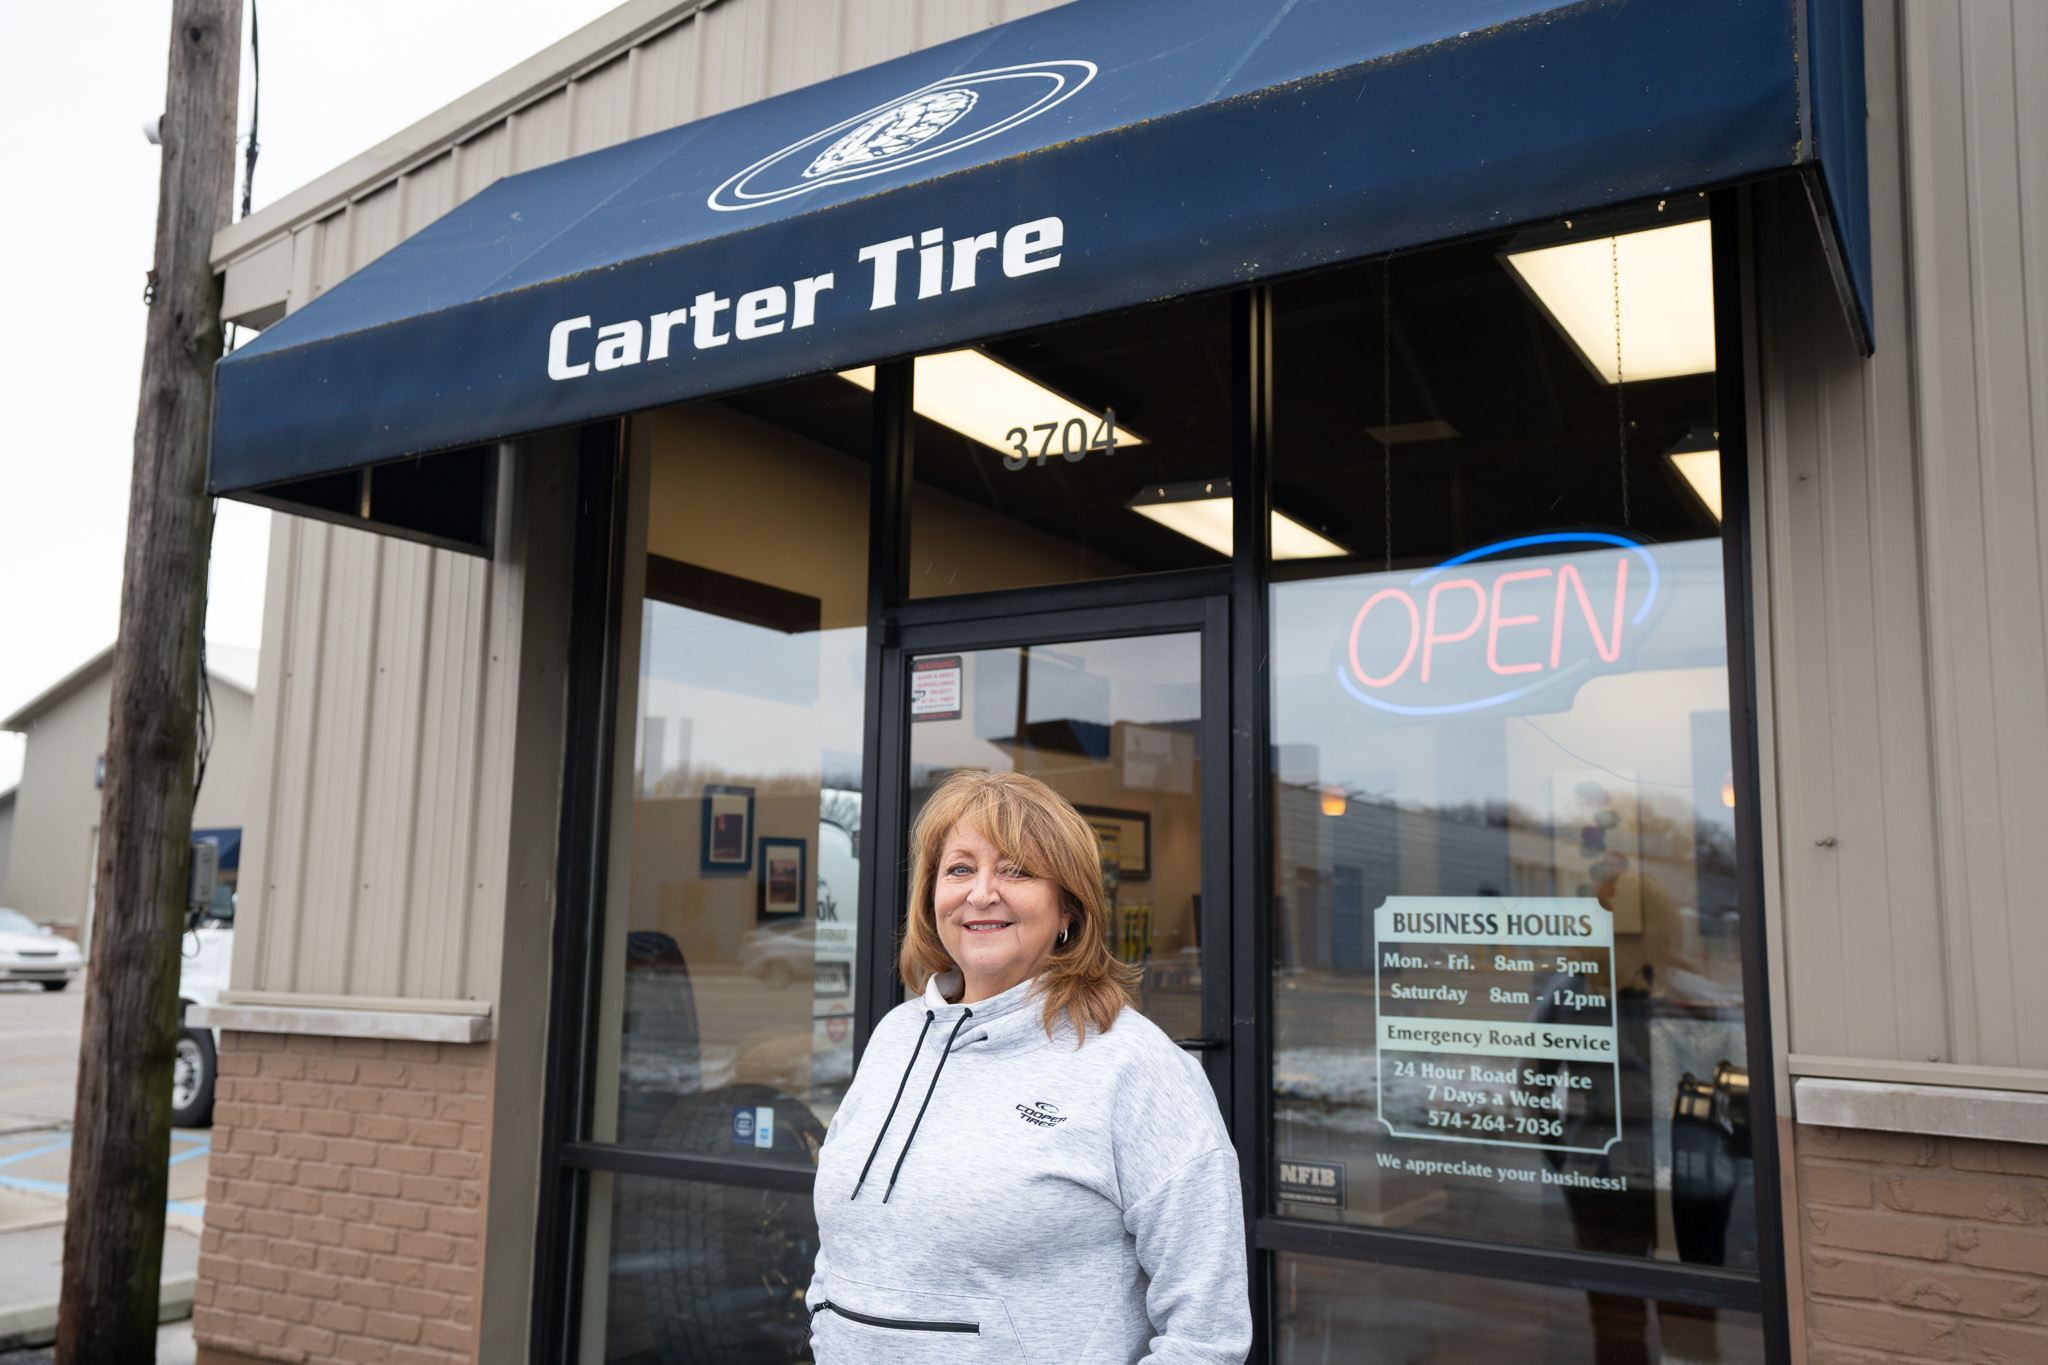 Patti Piscione (Former Owner of Carter Tire & Automotive) stands outside Carter Tire in Elkhart, Indiana